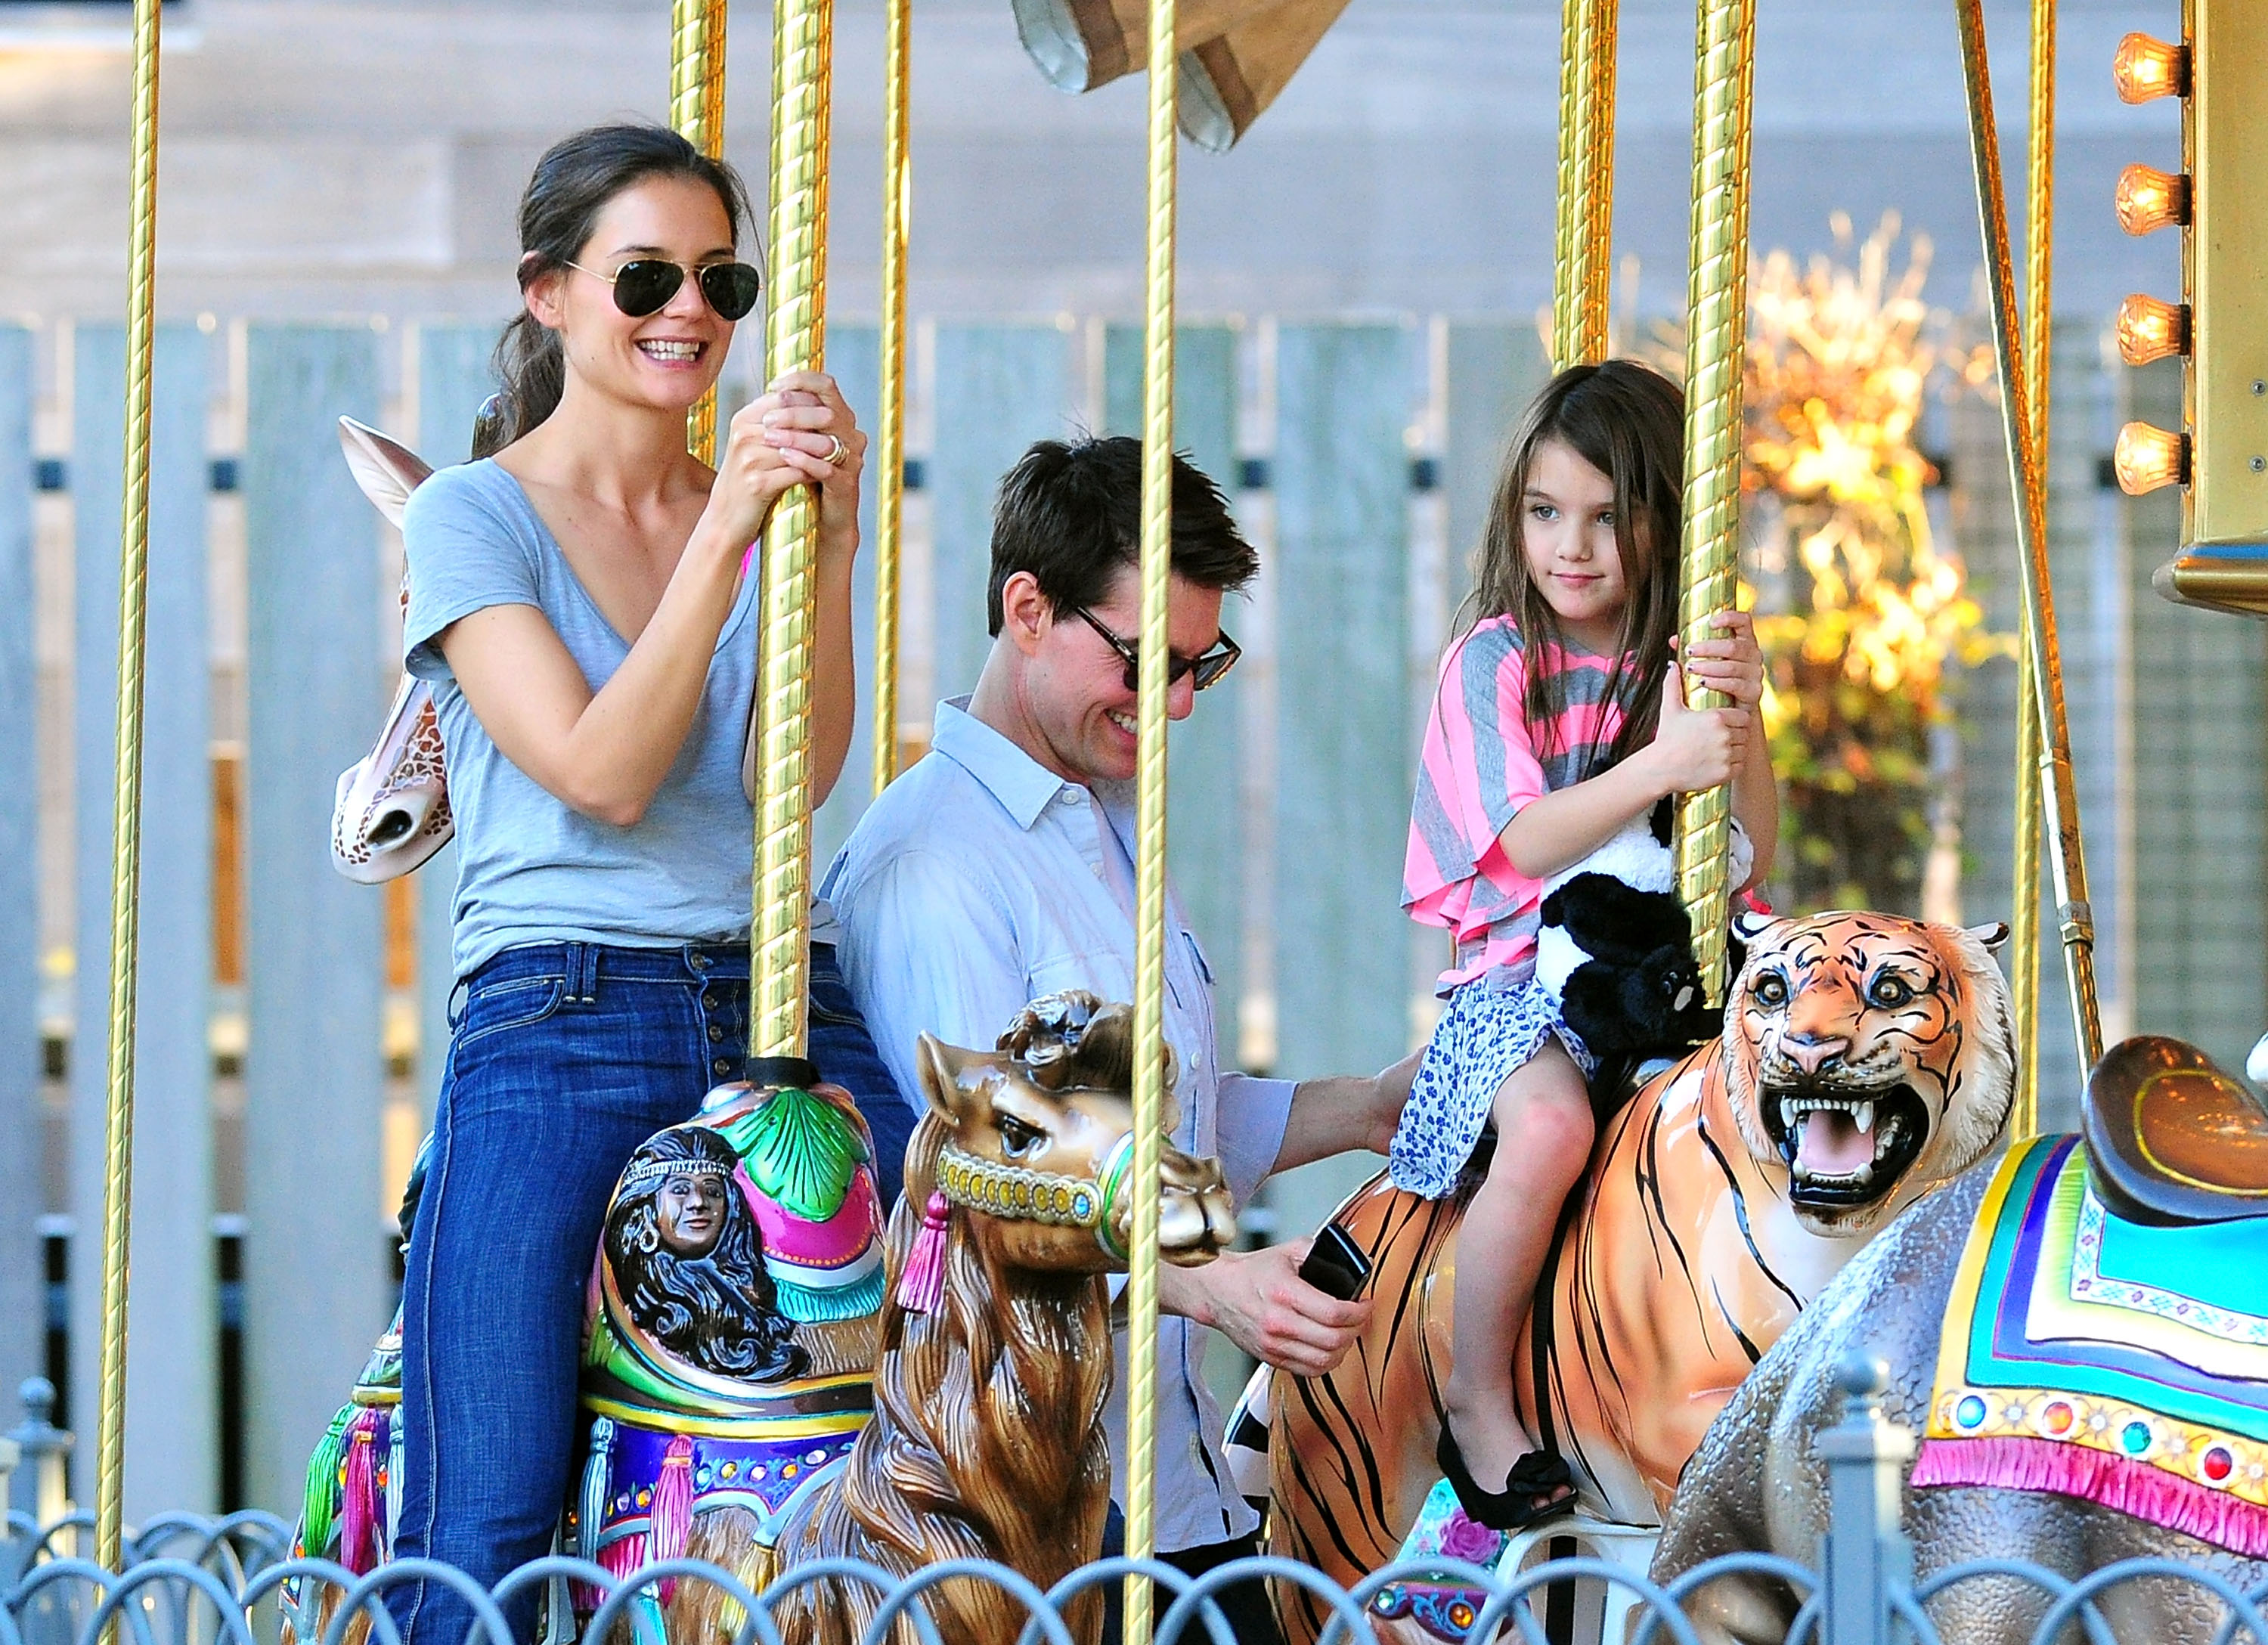 Katie Holmes, Tom Cruise, and Suri Cruise visit Schenley Plaza's carousel in Pittsburgh, Pennsylvania on October 8, 2011. | Source: Getty Images